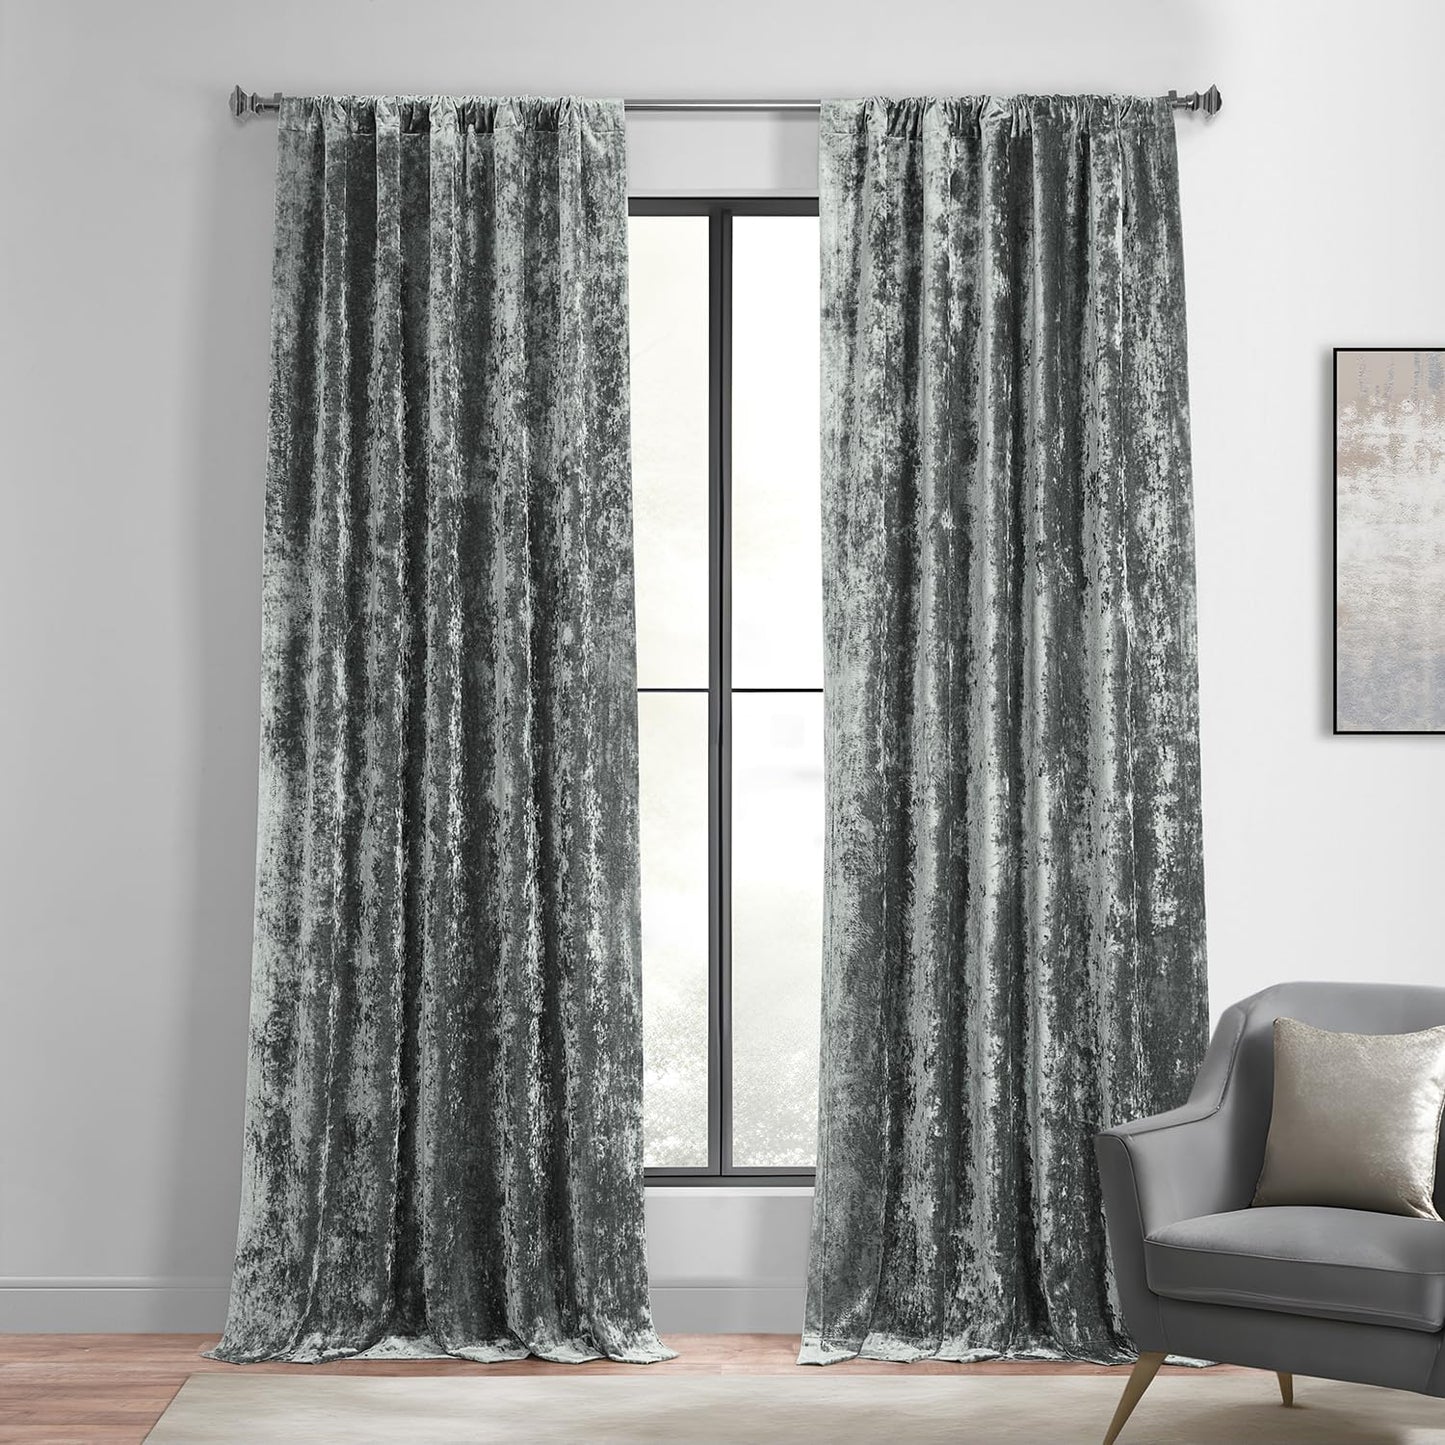 HPD Half Price Drapes Lush Crush Velvet Curtains - Room Darkening Curtain 96 Inches Long for Bedroom & Living Room, Luxury Look, Rod Pocket Design, (1 Panel), 50W X 96L, Taupe  Exclusive Fabrics & Furnishings Stone Grey 50W X 108L 